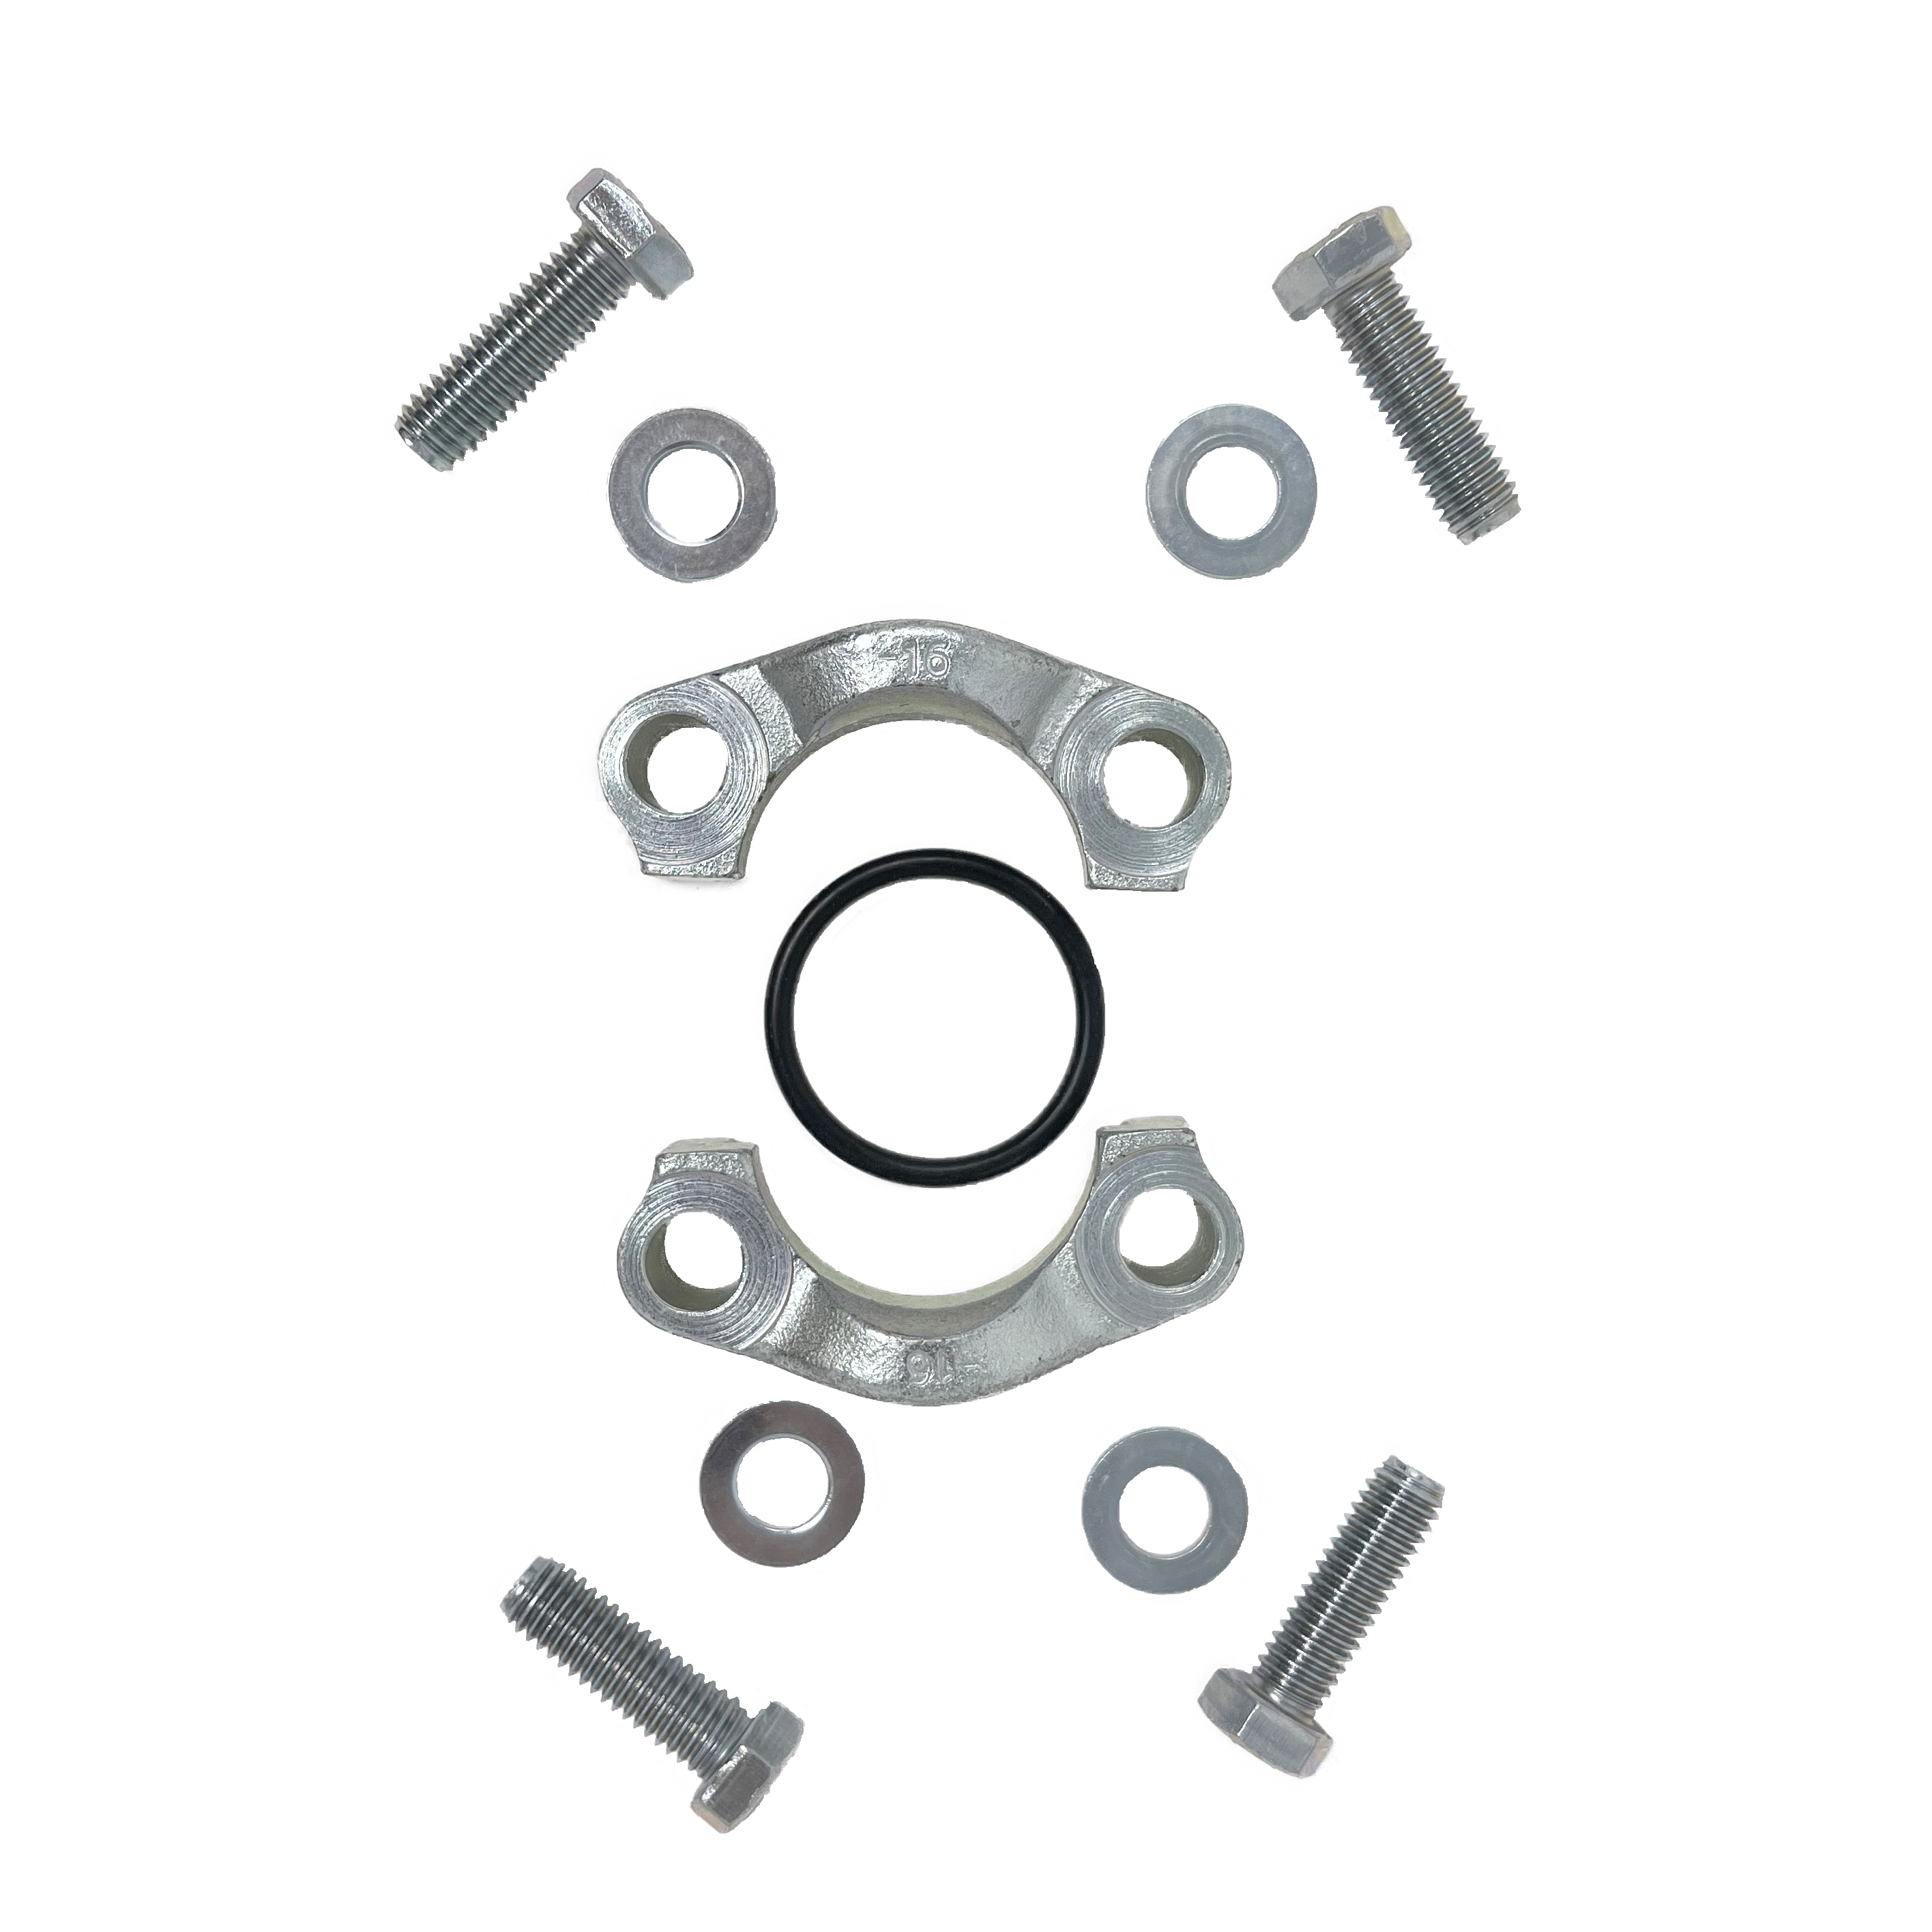 48SFO : AFP Split Flange Kit, Steel, 3" Code 61, 3000psi, Includes two (2) halves, four (4) bolts, four (4) washers, and one (1) O-Ring